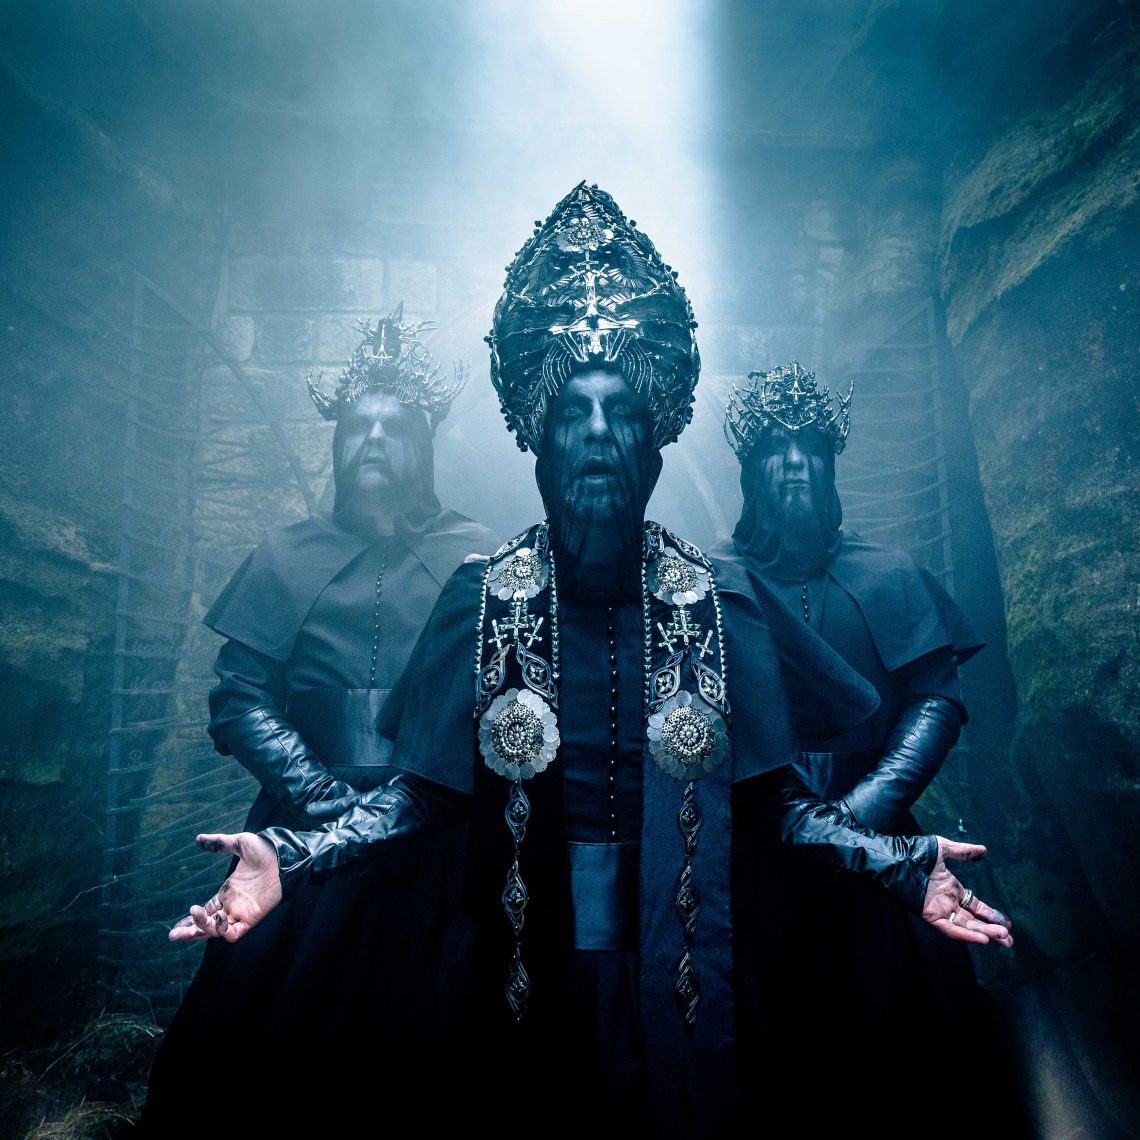 BEHEMOTH launch pre-order for tour edition of I Loved You At Your Darkest, out Jan 24